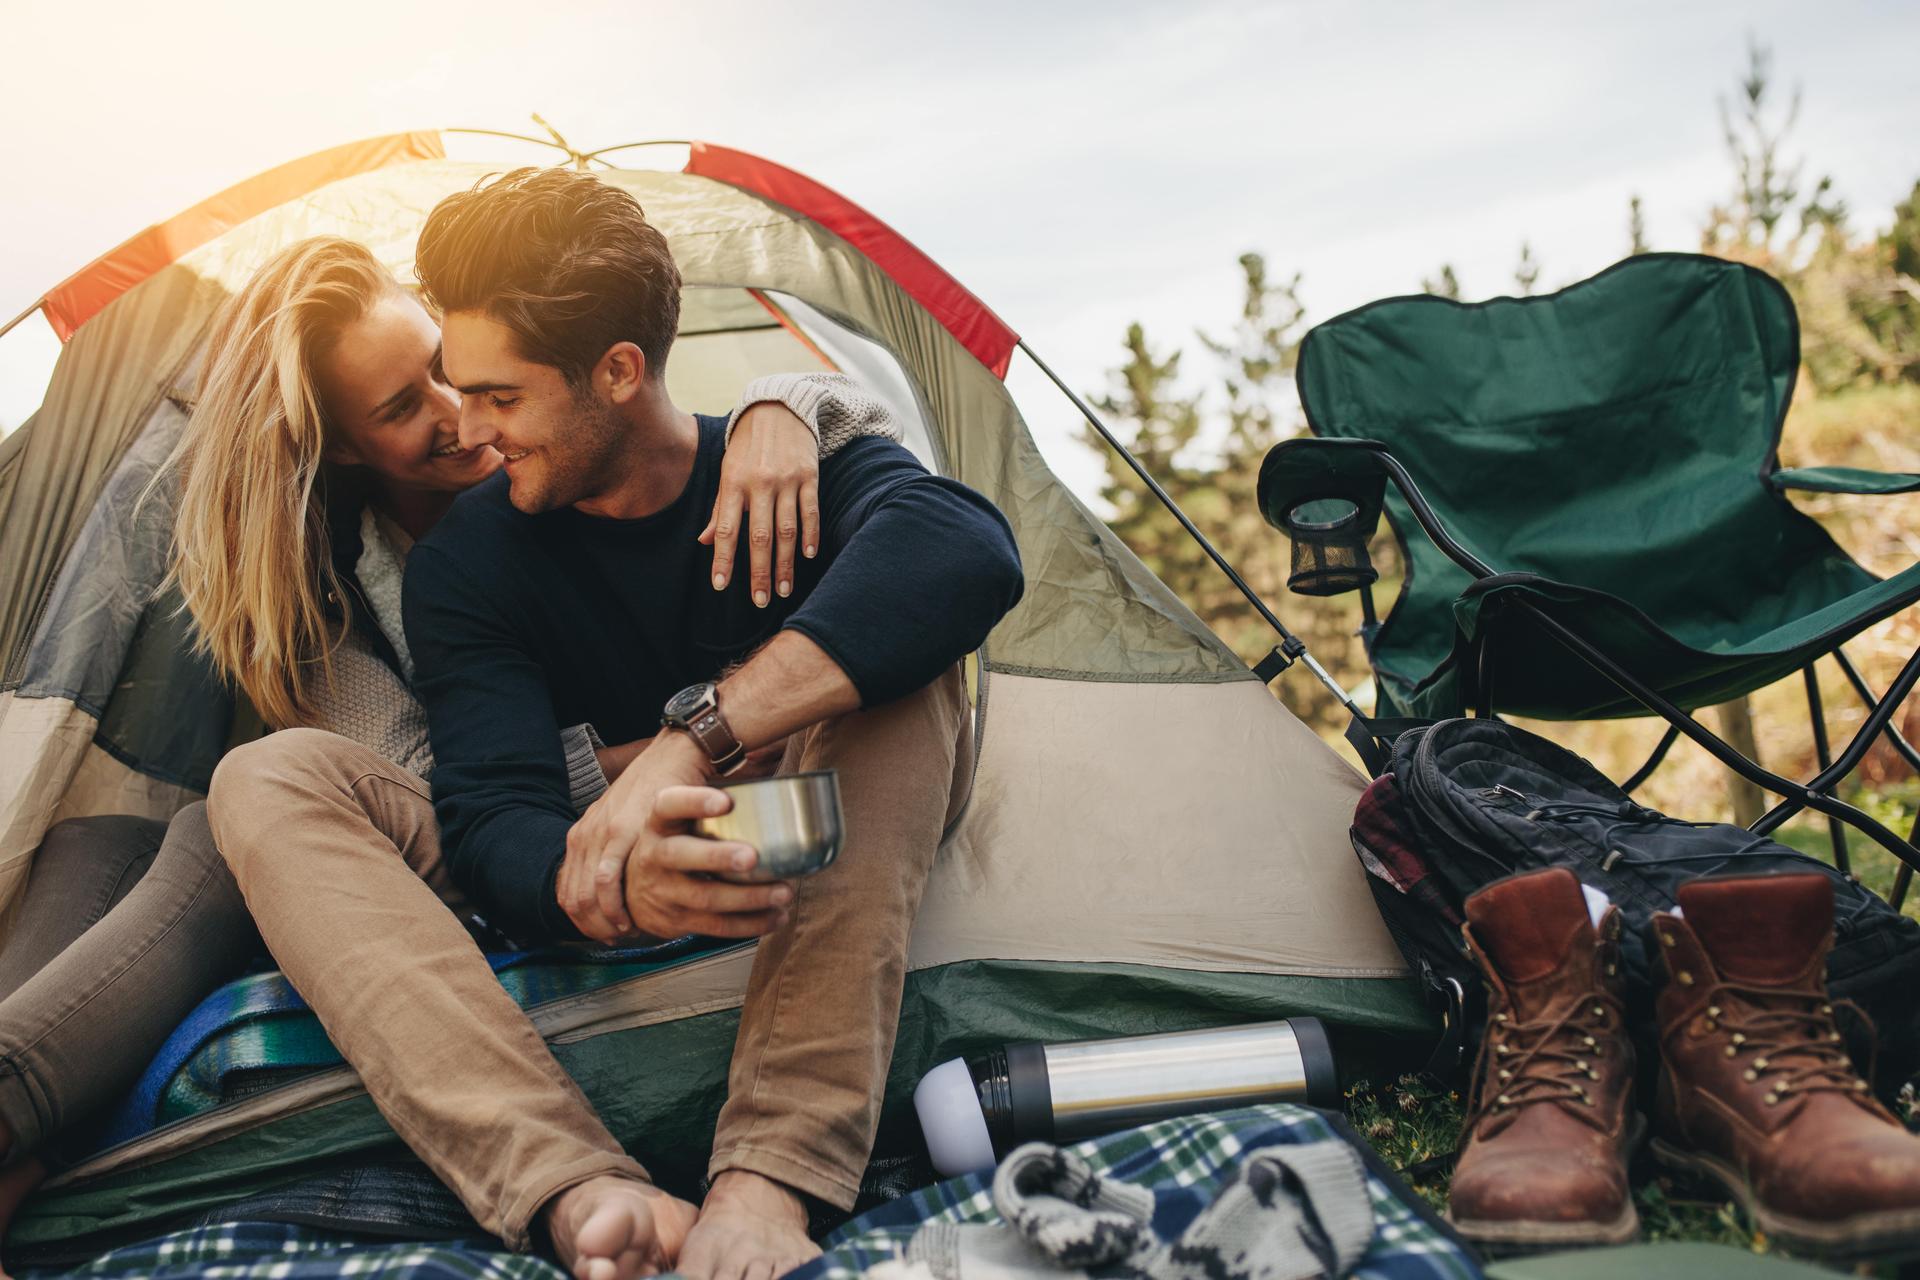 Camping Date Ideas for Summer